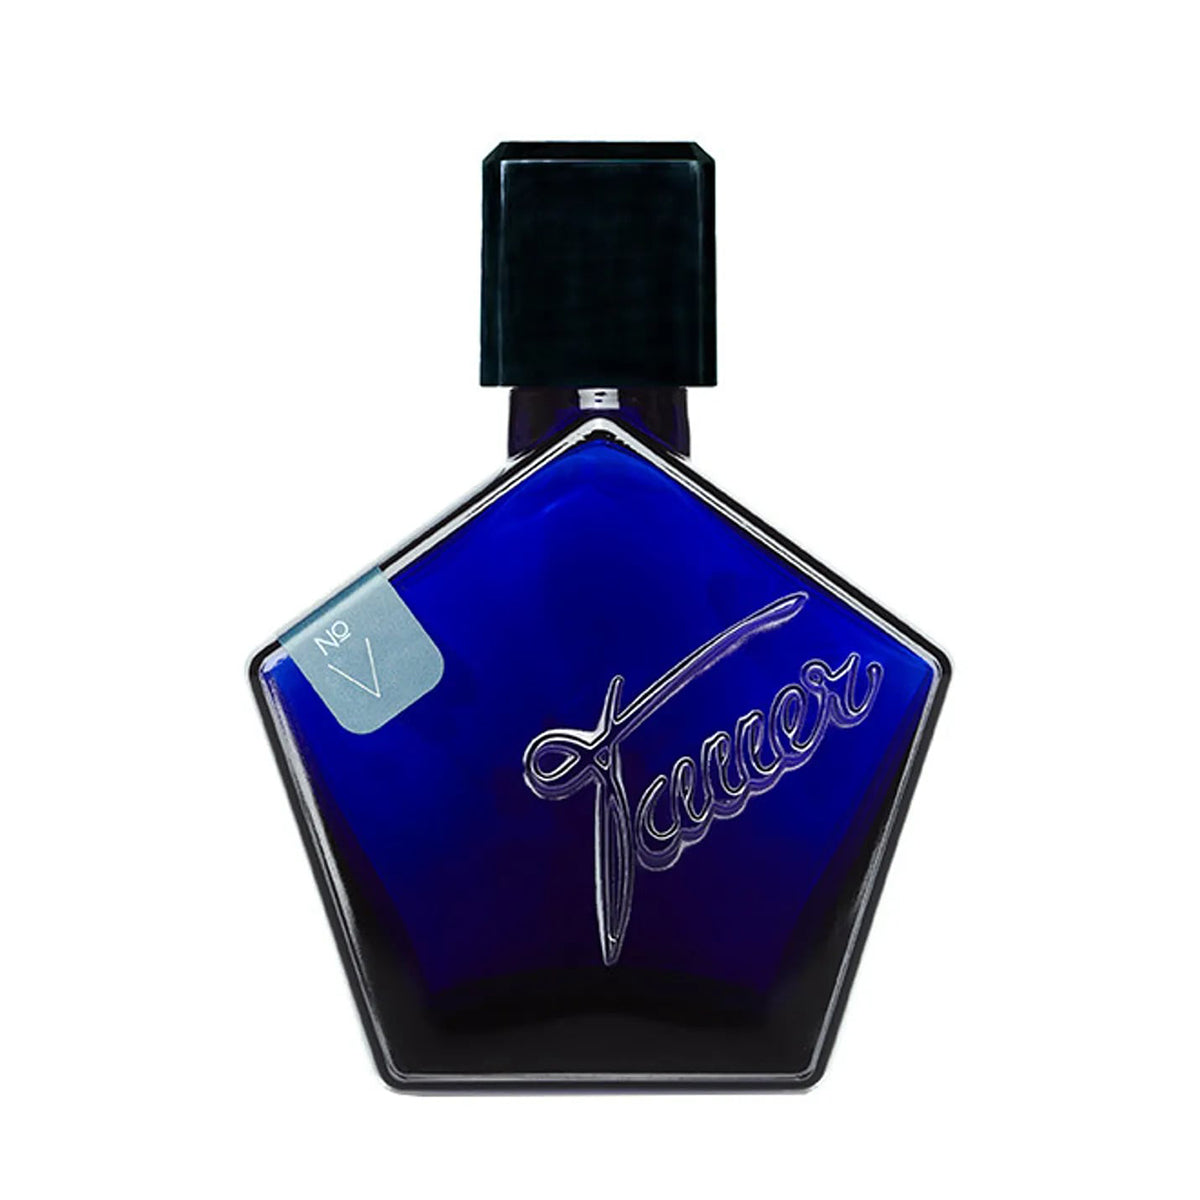 ANDY TAUER NO 05 INCENSE EXTREME EDP 50 ML